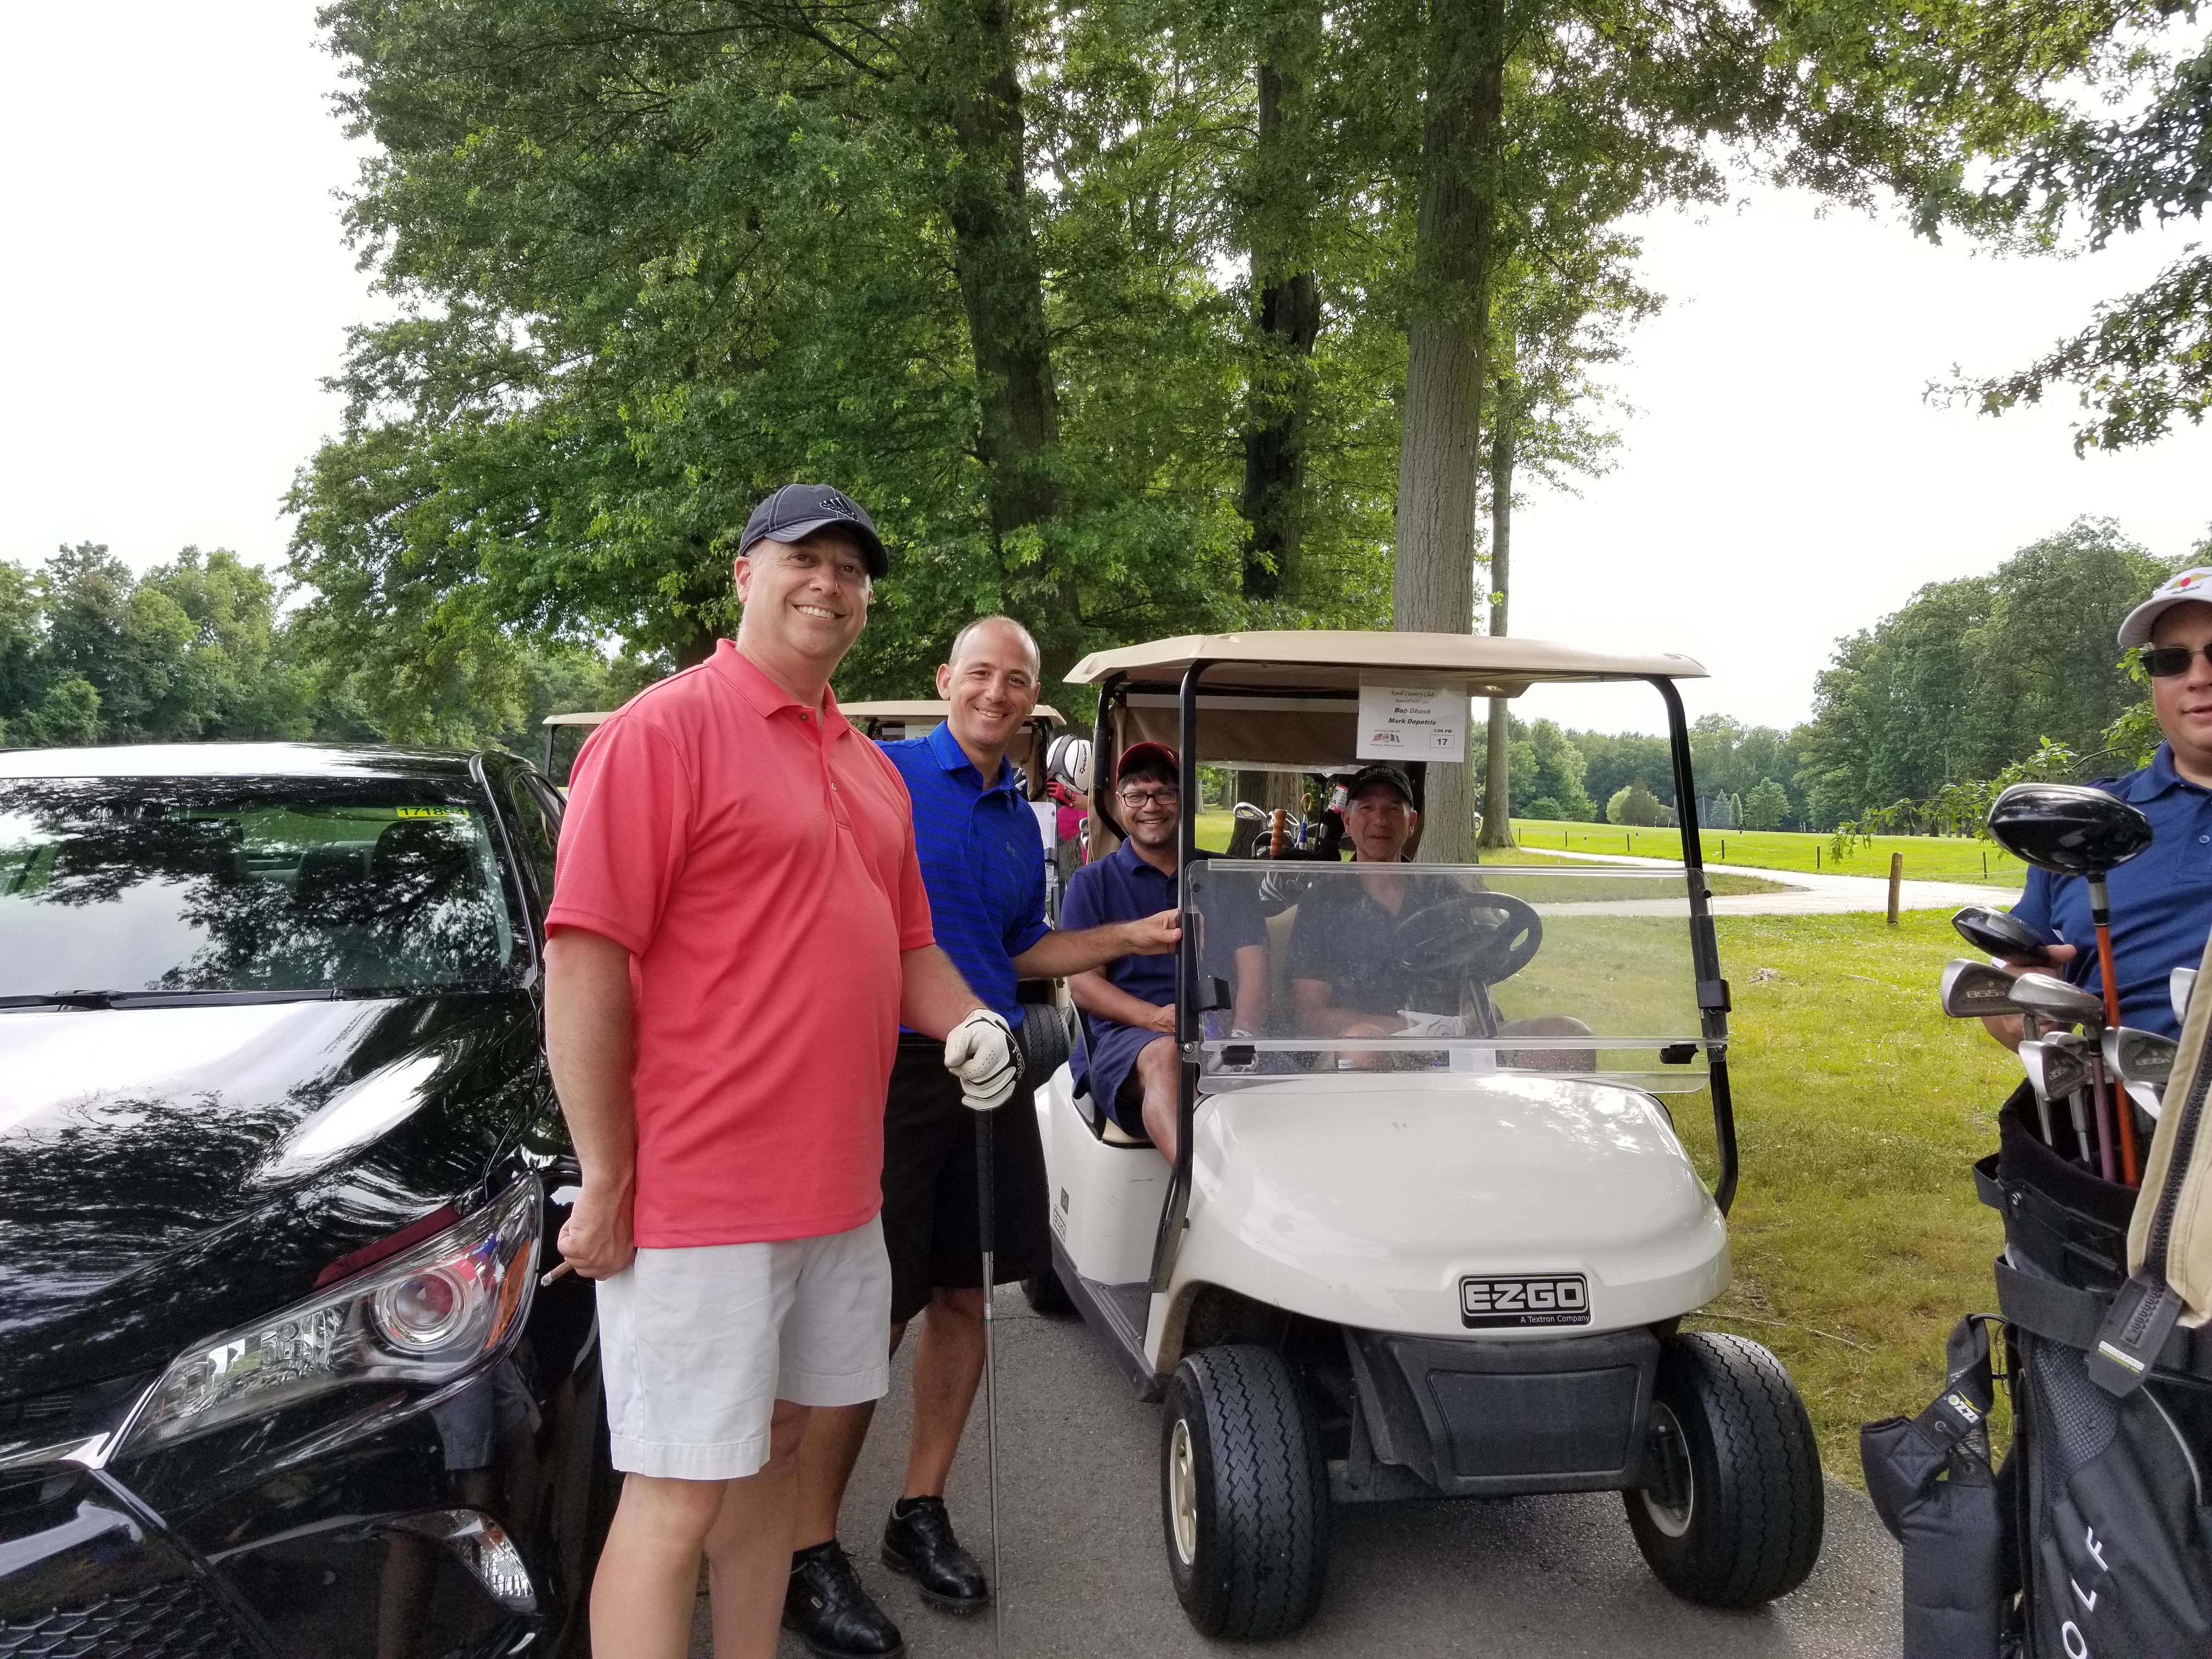 Parsippany Sons of Italy has Successful Golf Outing!